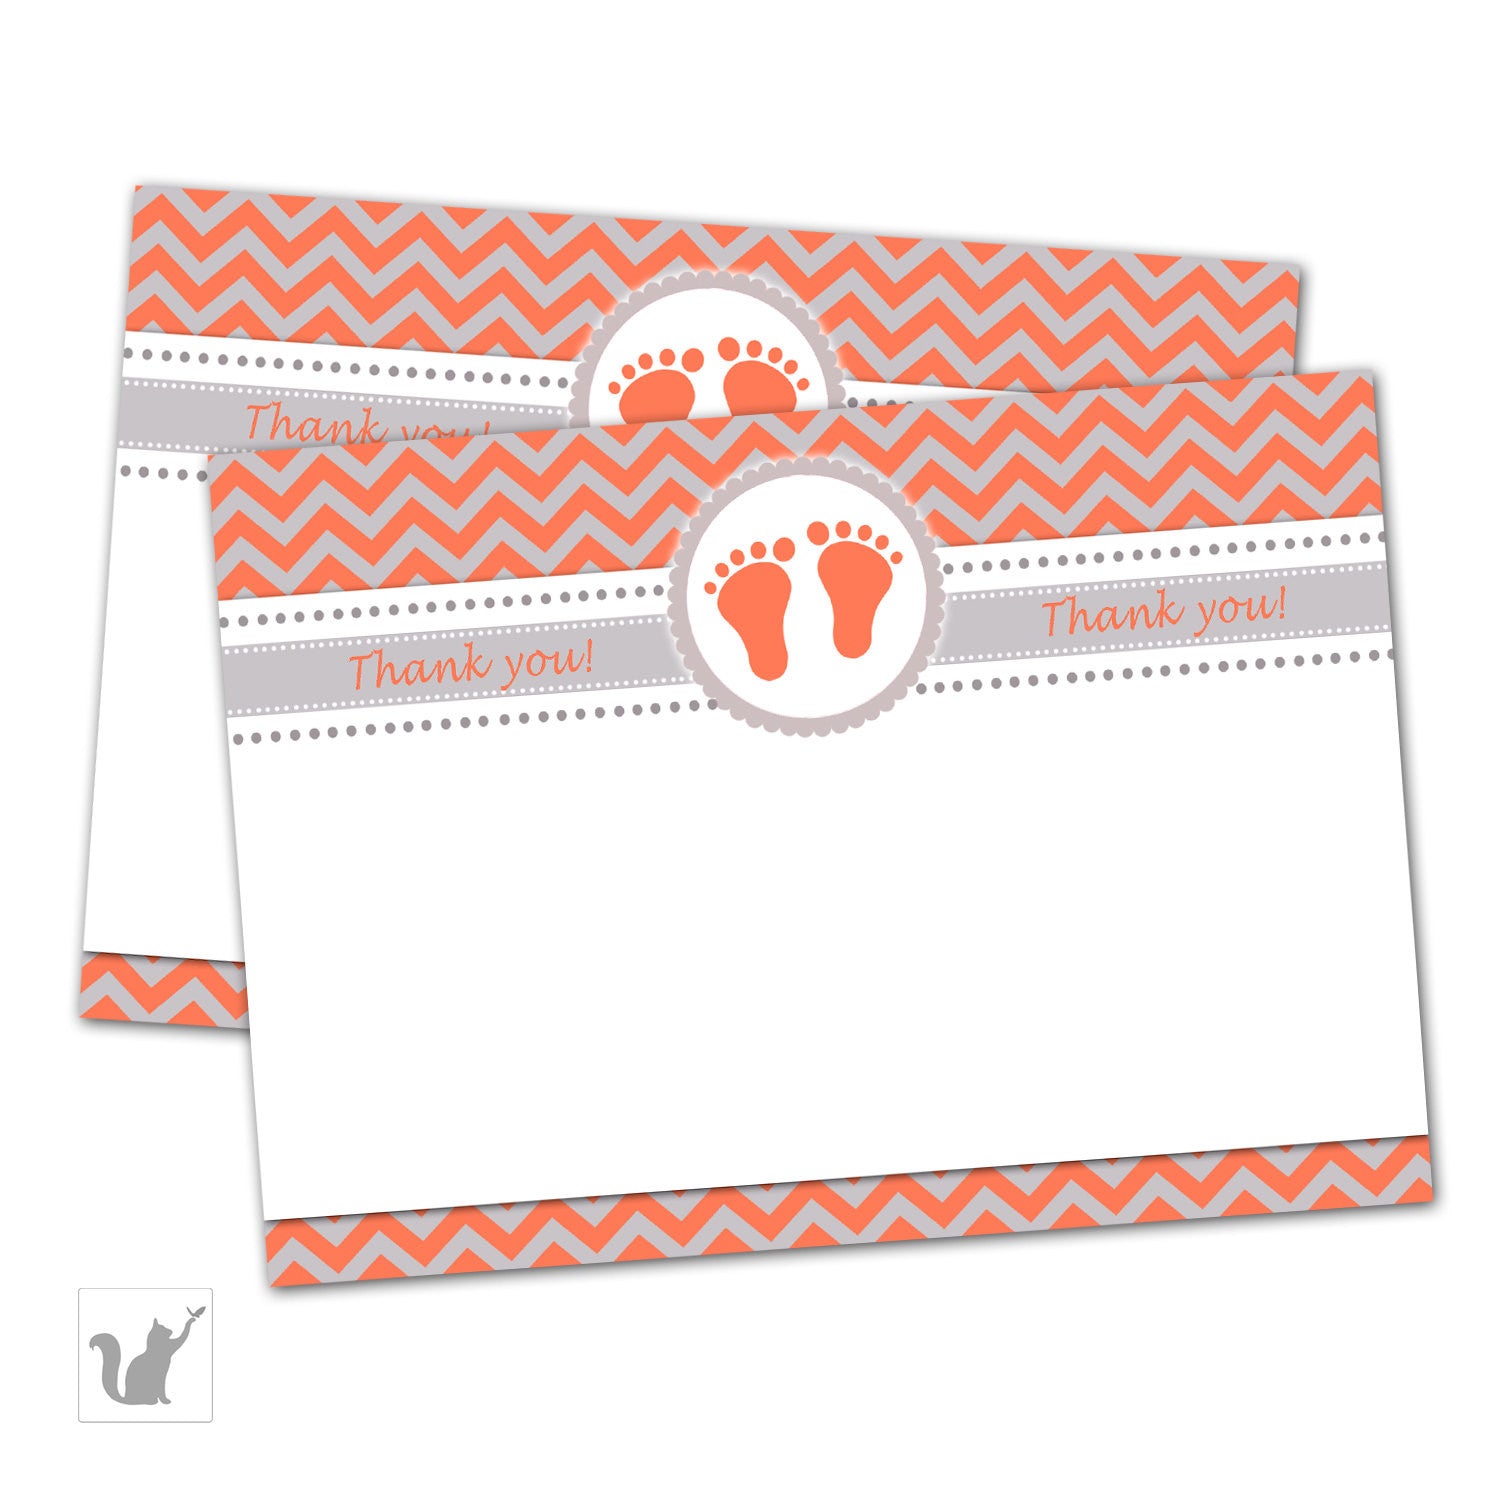 Orange Grey Baby Feet Baby Shower Blank Thank You Cards Note - Zig Zag Baby Shower Party Thank You Card Baby Boy Girl Party INSTANT DOWNLOAD